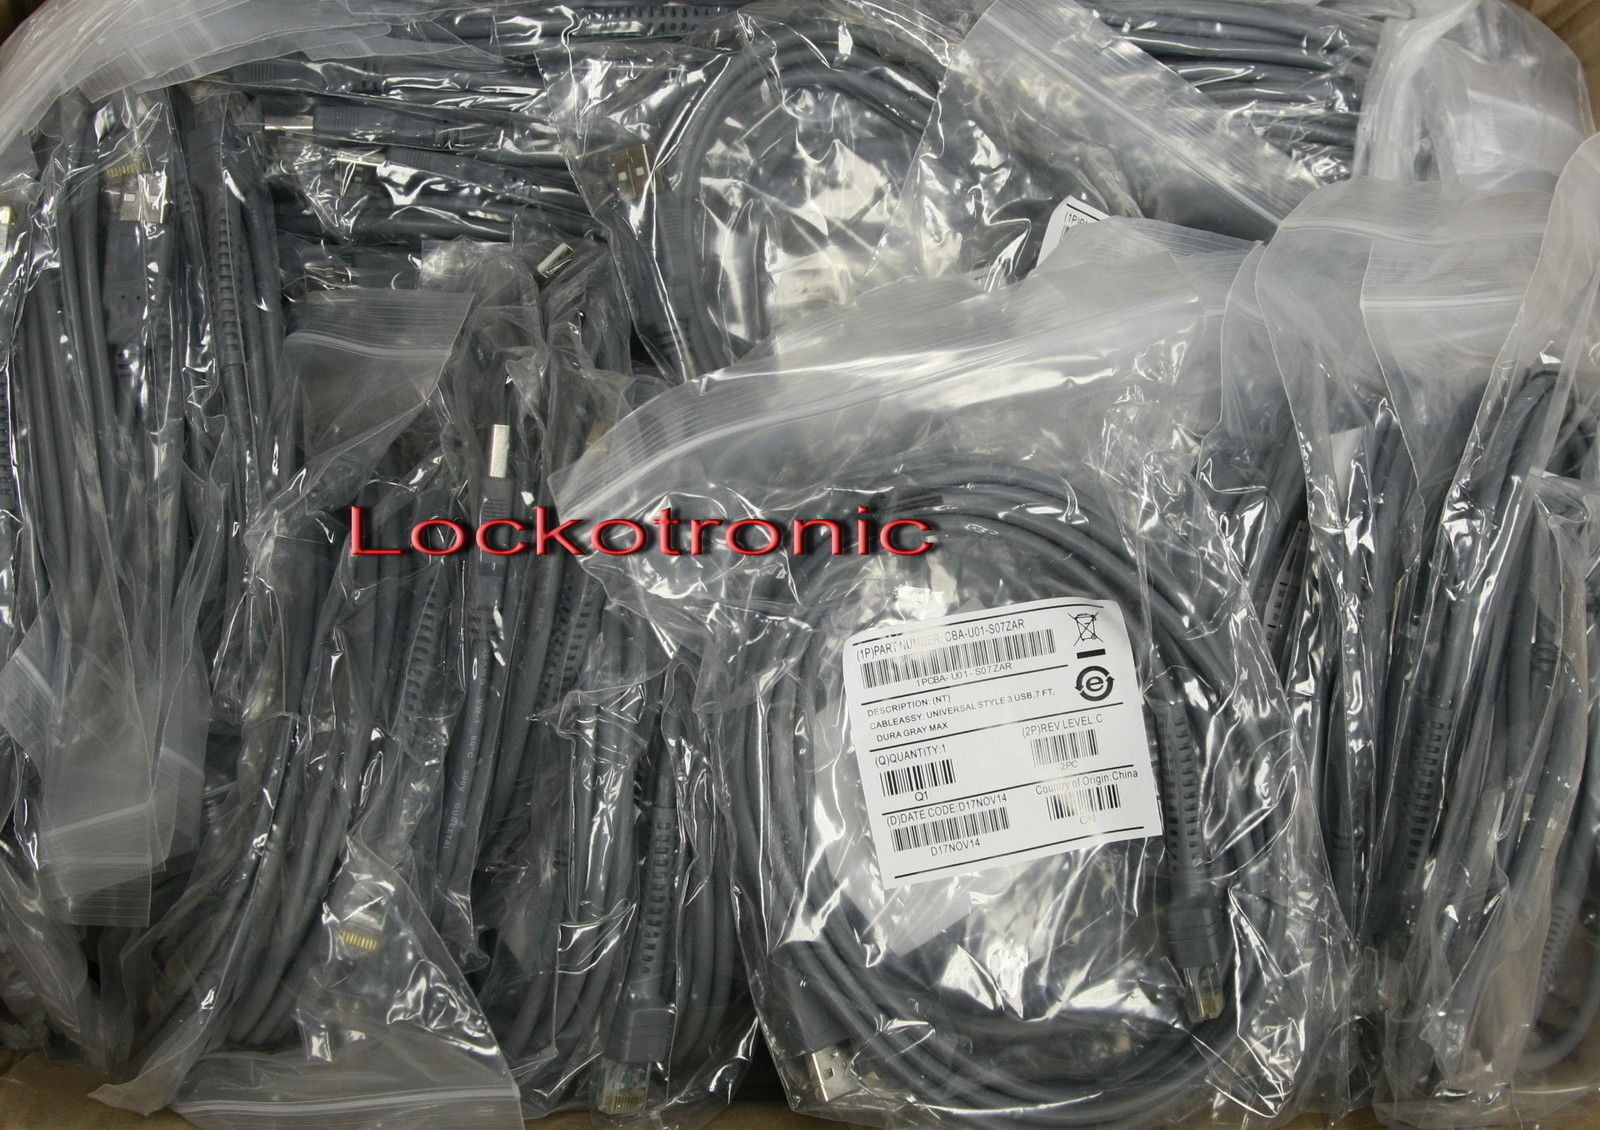 Lot 50 New Motorola Symbol Barcode Scanner USB cable for LS4278 LS2208 CBA